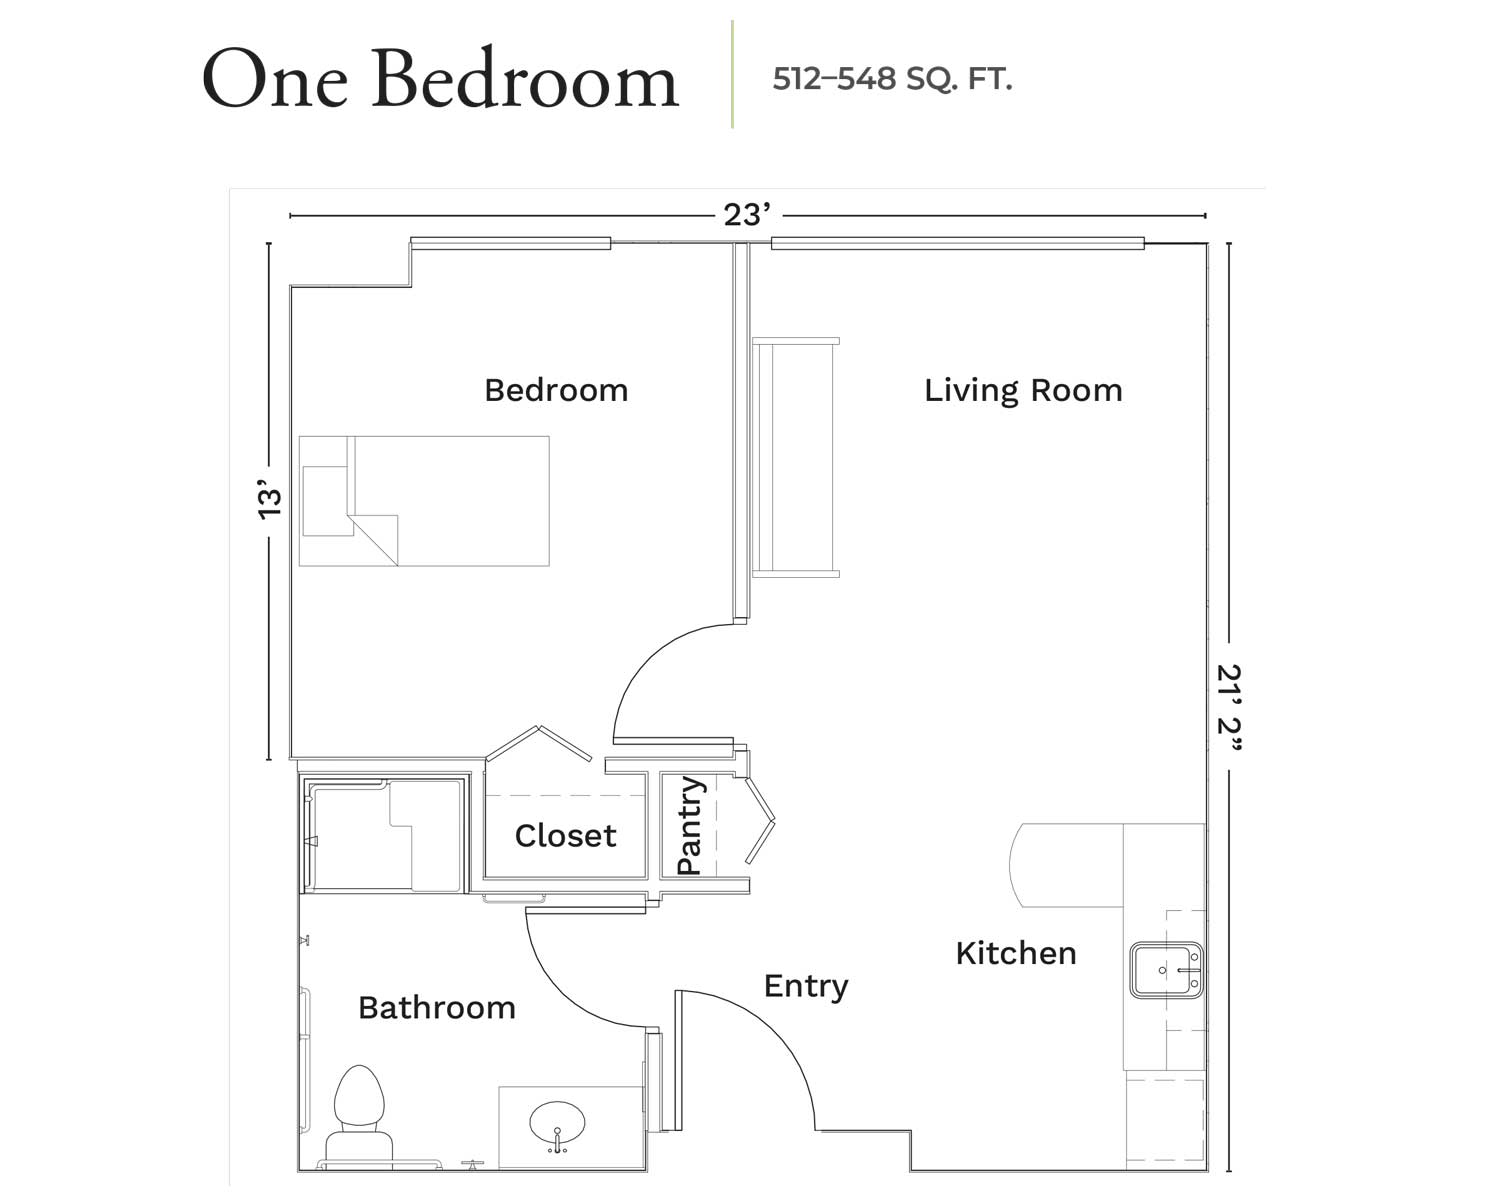 One-bedroom apartment floor plan with dimensions and 512-548 square feet area.